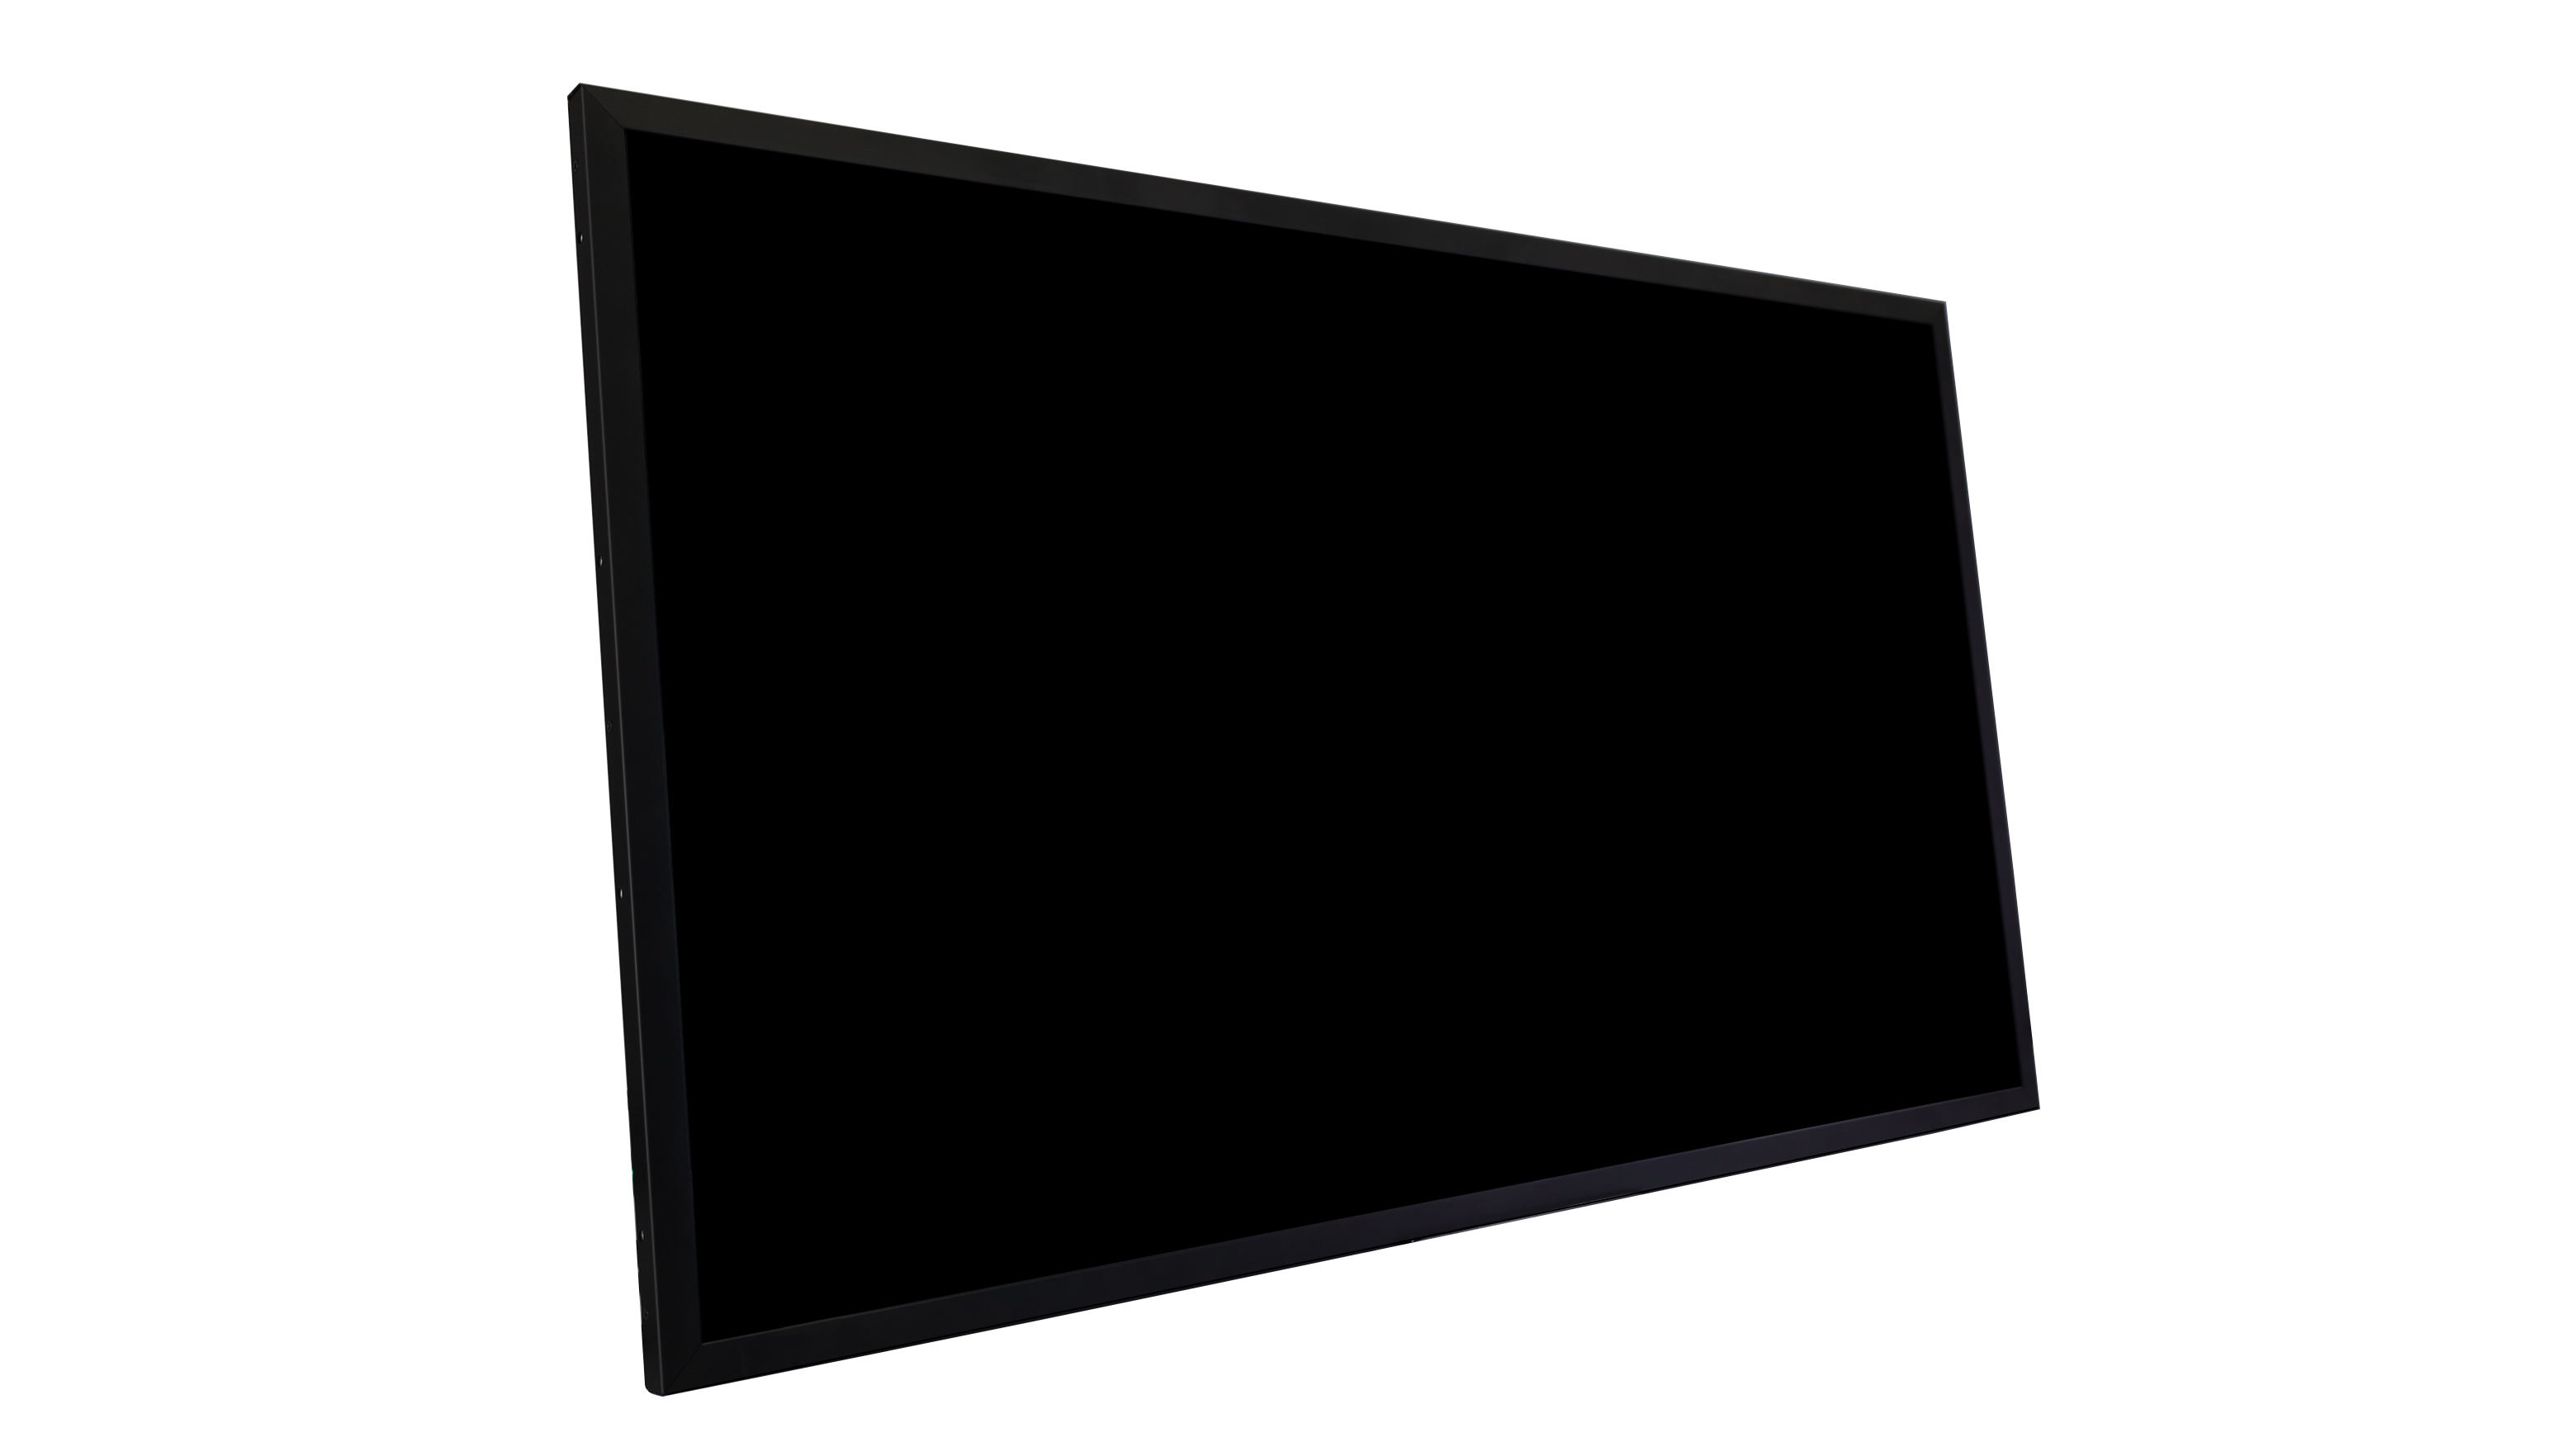 32inch 800nits High Brightness Display Outdoor Sunlight Readable LCD Screen High Quality Advertising Equipment